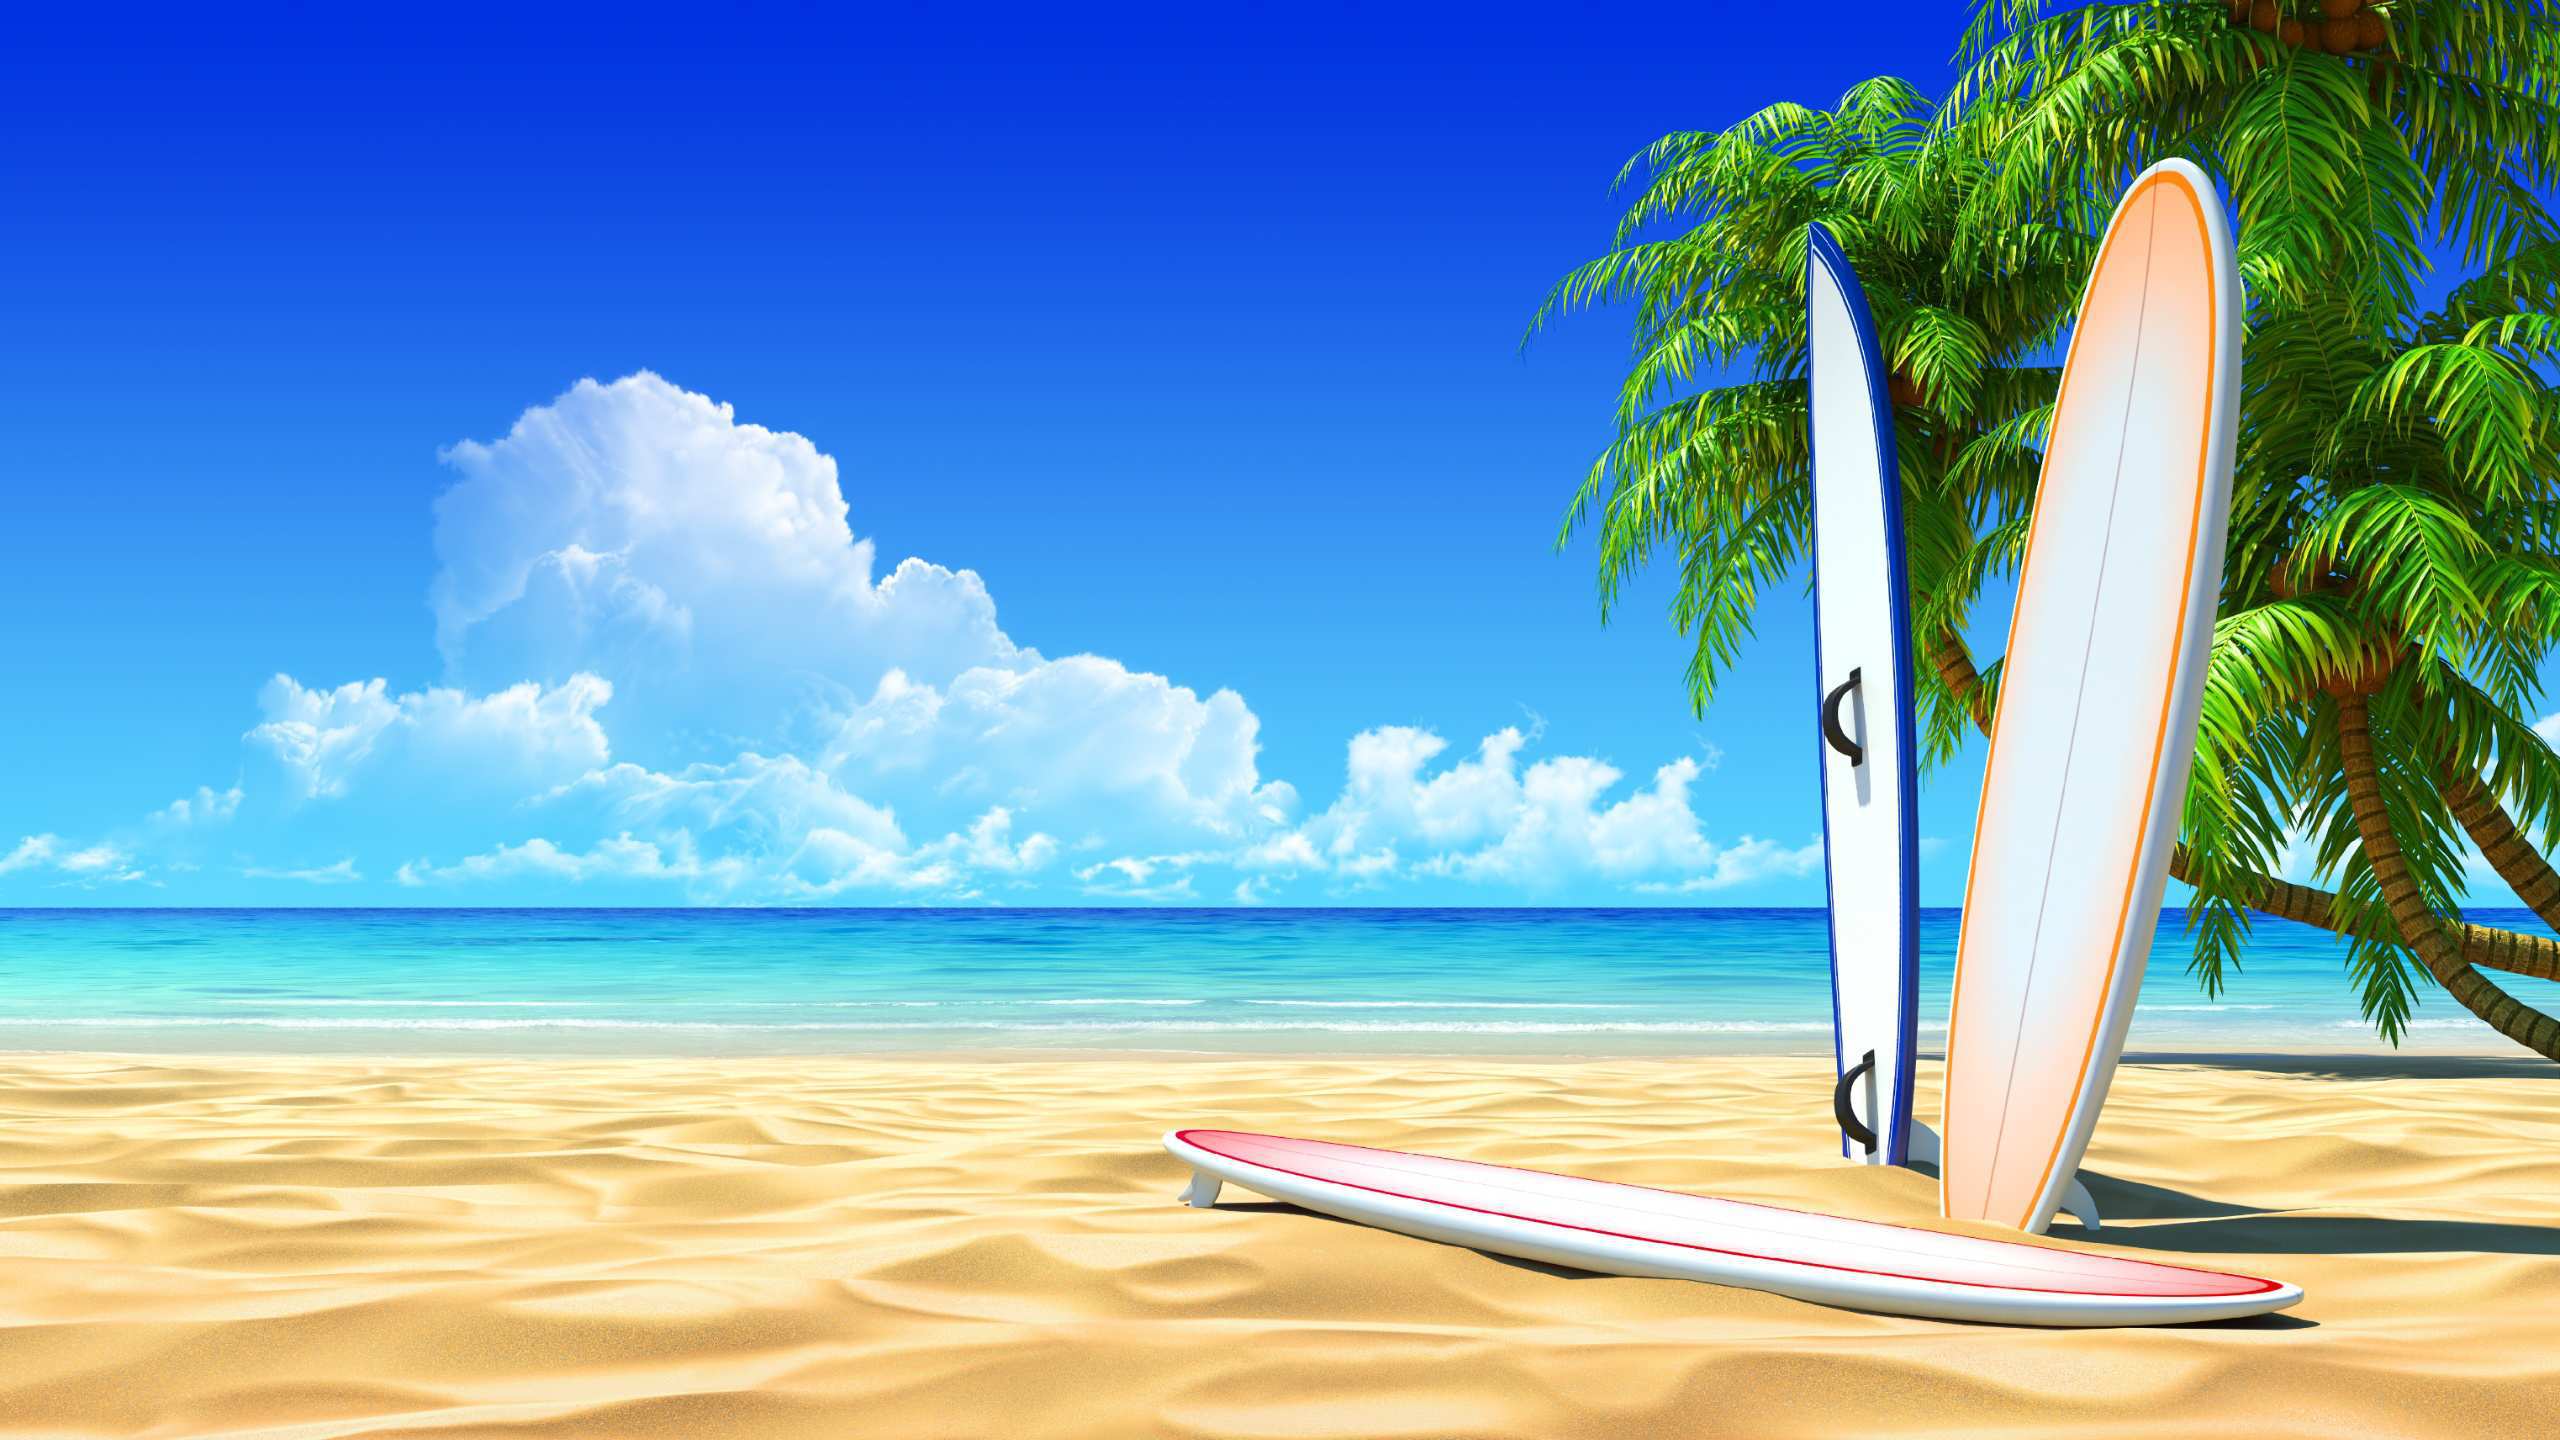 6 Kbytes, Sorted, Pc Backgrounds, Vintage California - Beach Background With Surfboard - HD Wallpaper 